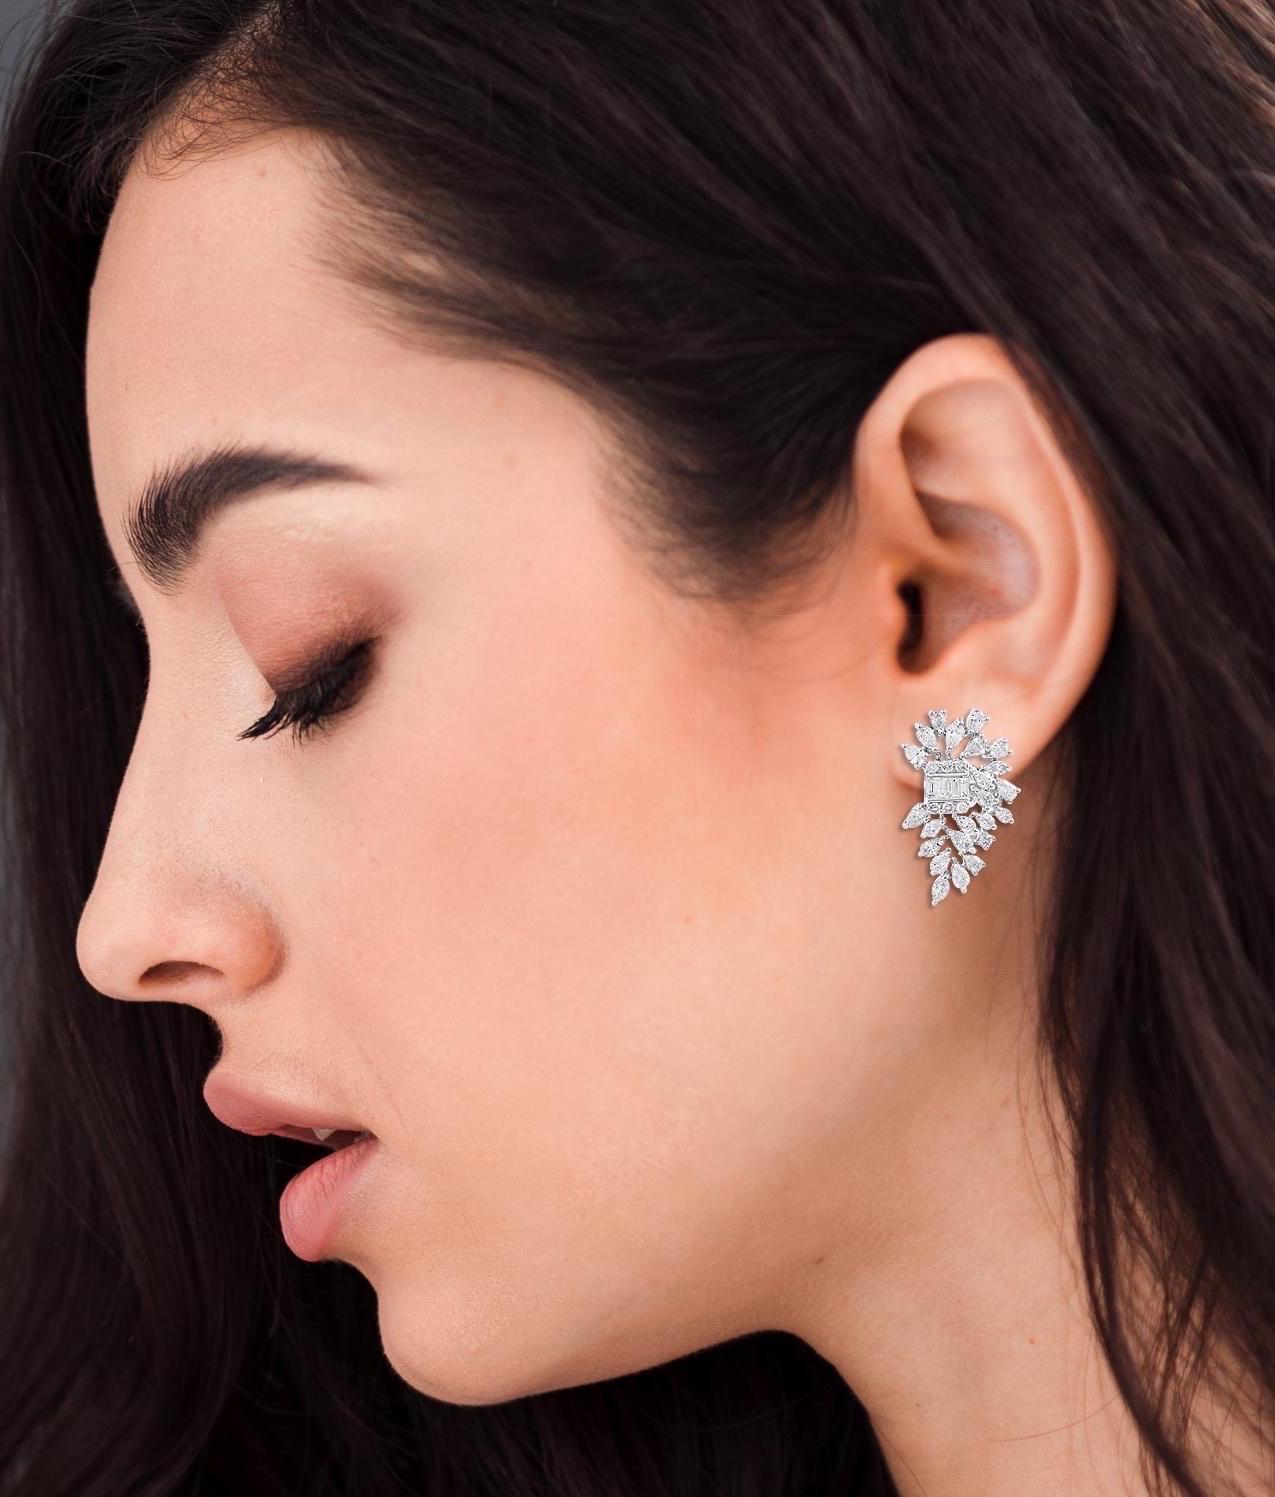 Cast in 18 karat white gold. These stunning earrings are handset with 3.52 carats of sparkling diamonds. Sweep hair off your face to really let them shine.

FOLLOW MEGHNA JEWELS storefront to view the latest collection & exclusive pieces. Meghna